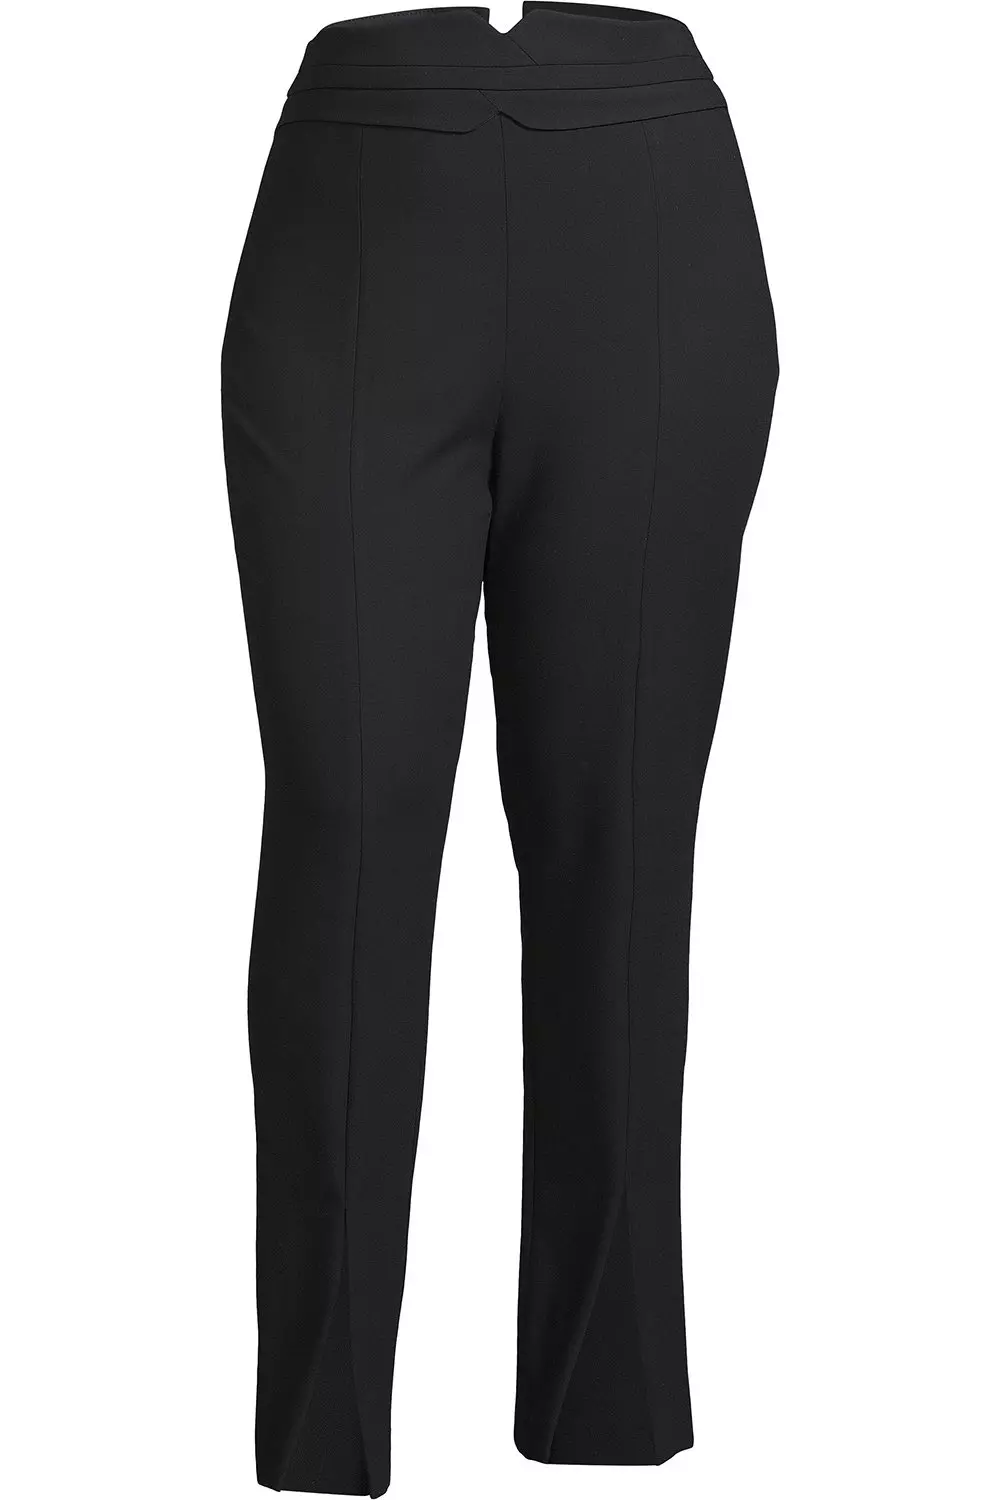 Style co Women Pant NEW Size 8, 10, 16, 18. Black Polyester Spandex Mid  Rise A4